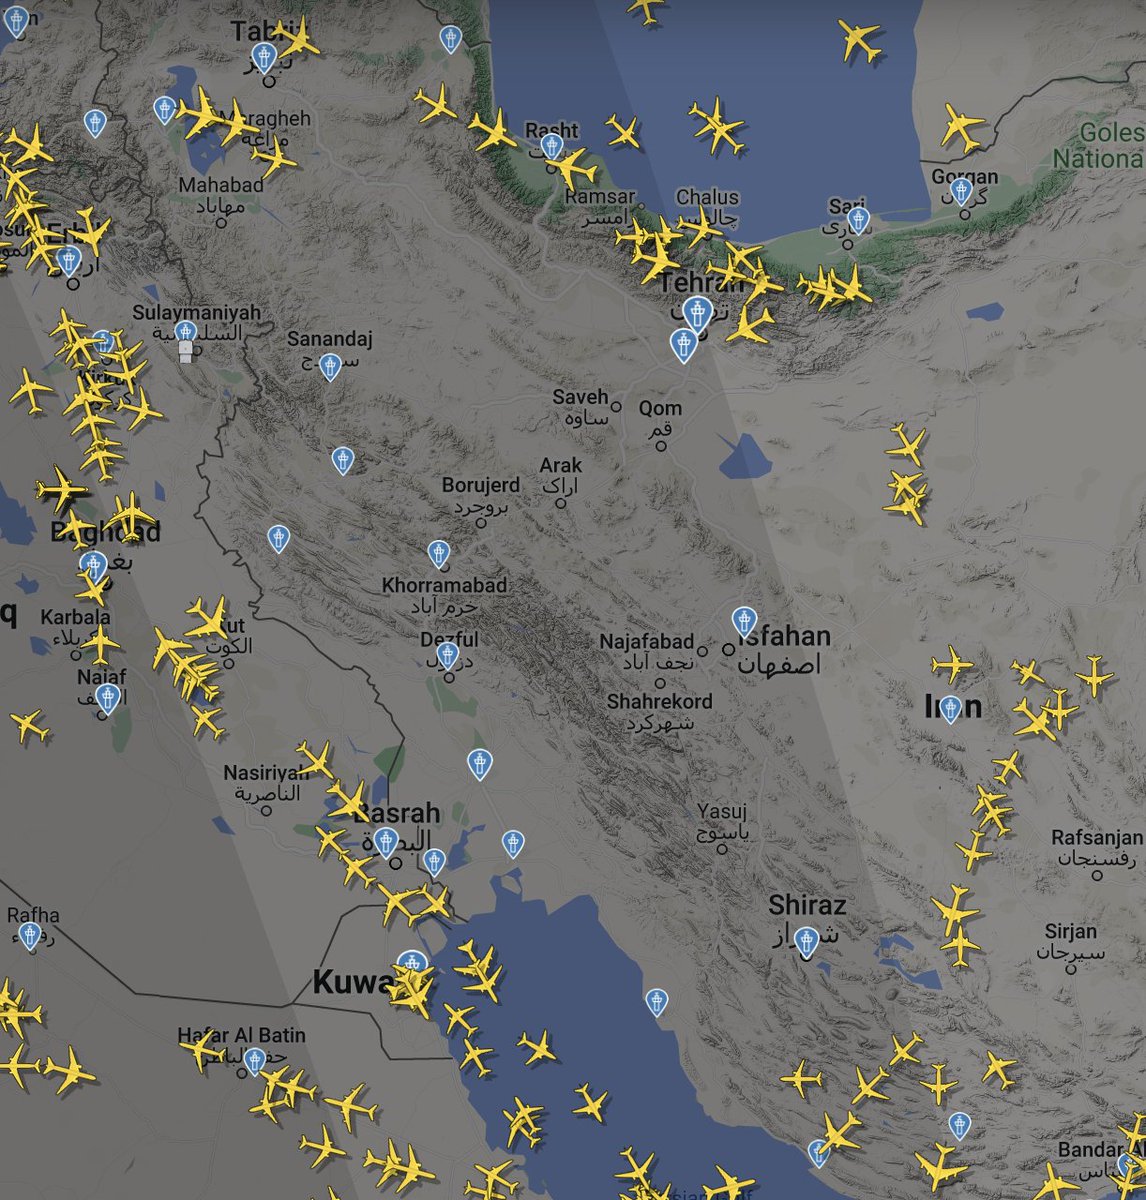 Planes flying over Iran are flying on a much more easterly course, thus avoiding the western part of the country.